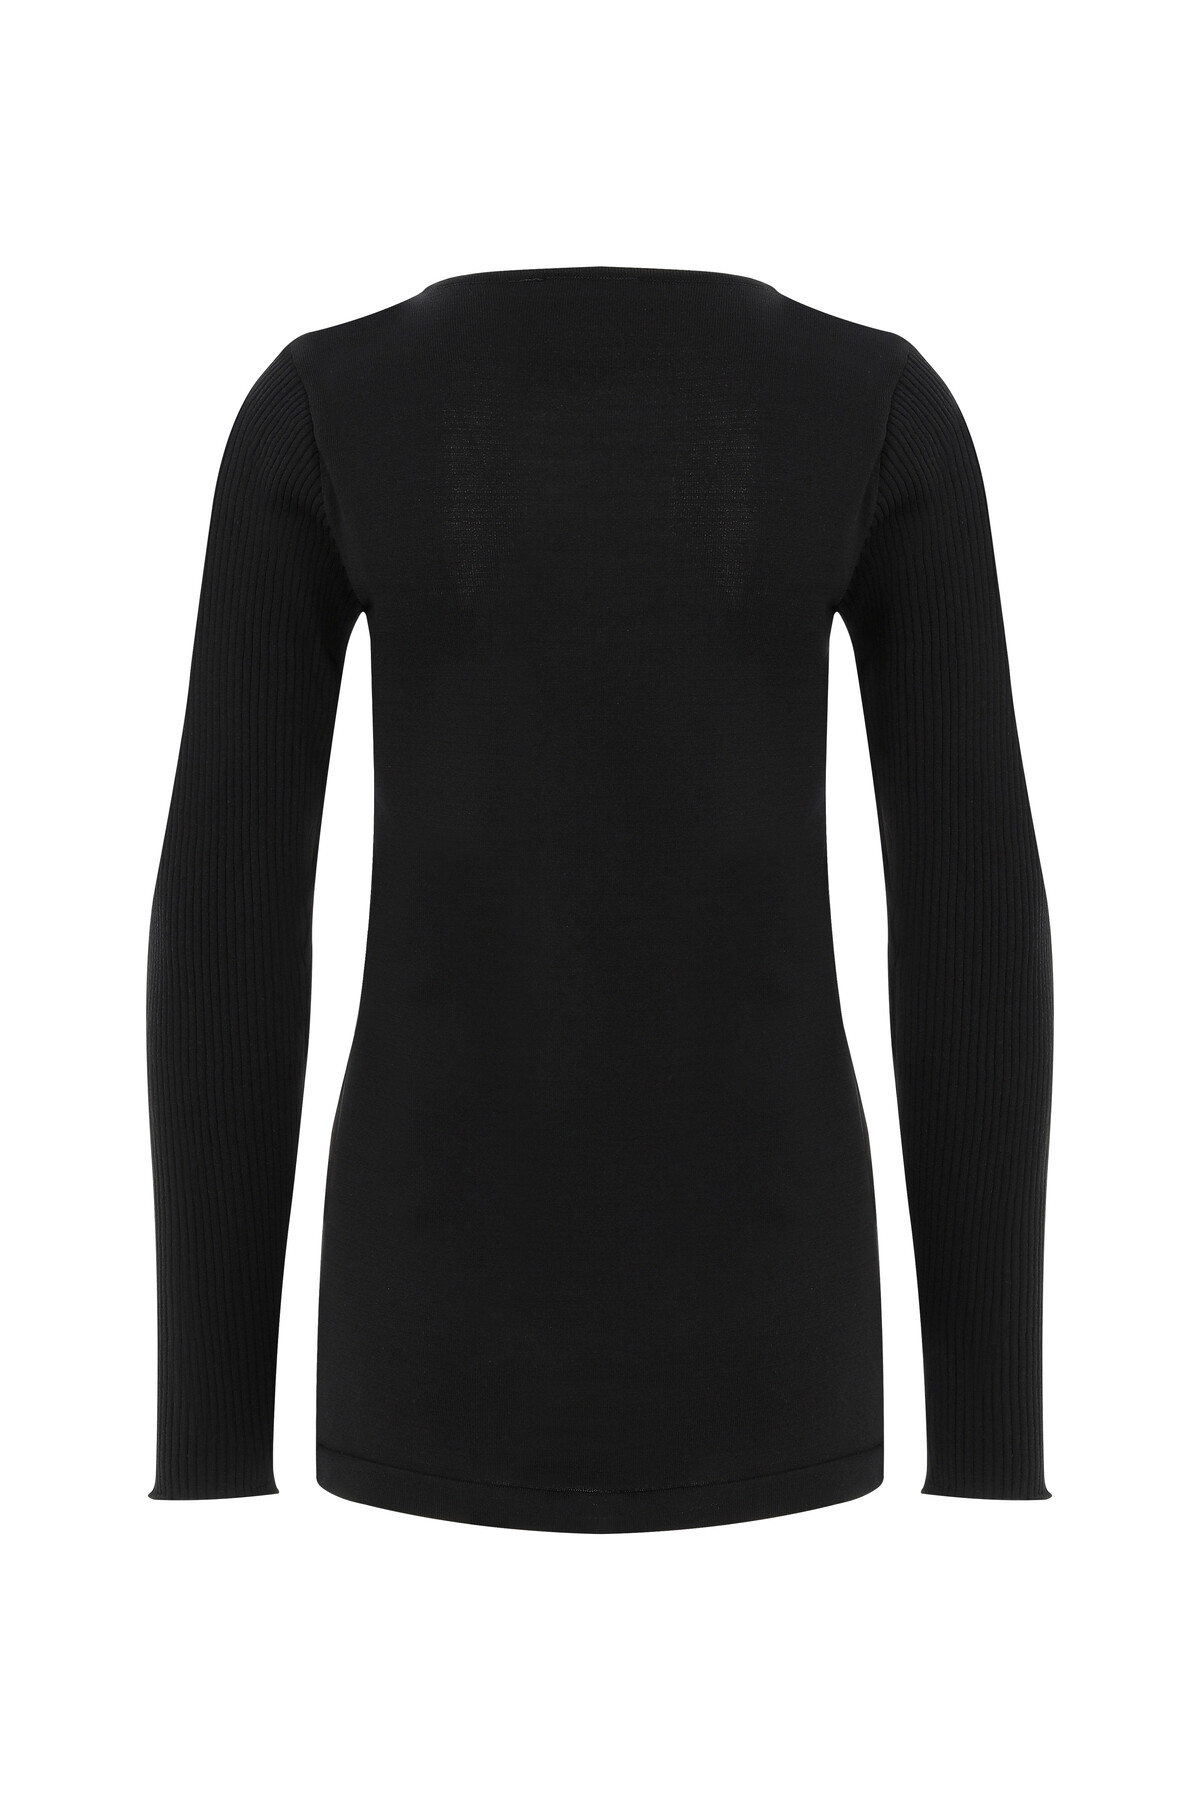 KENDY Cut Out Black Sweater